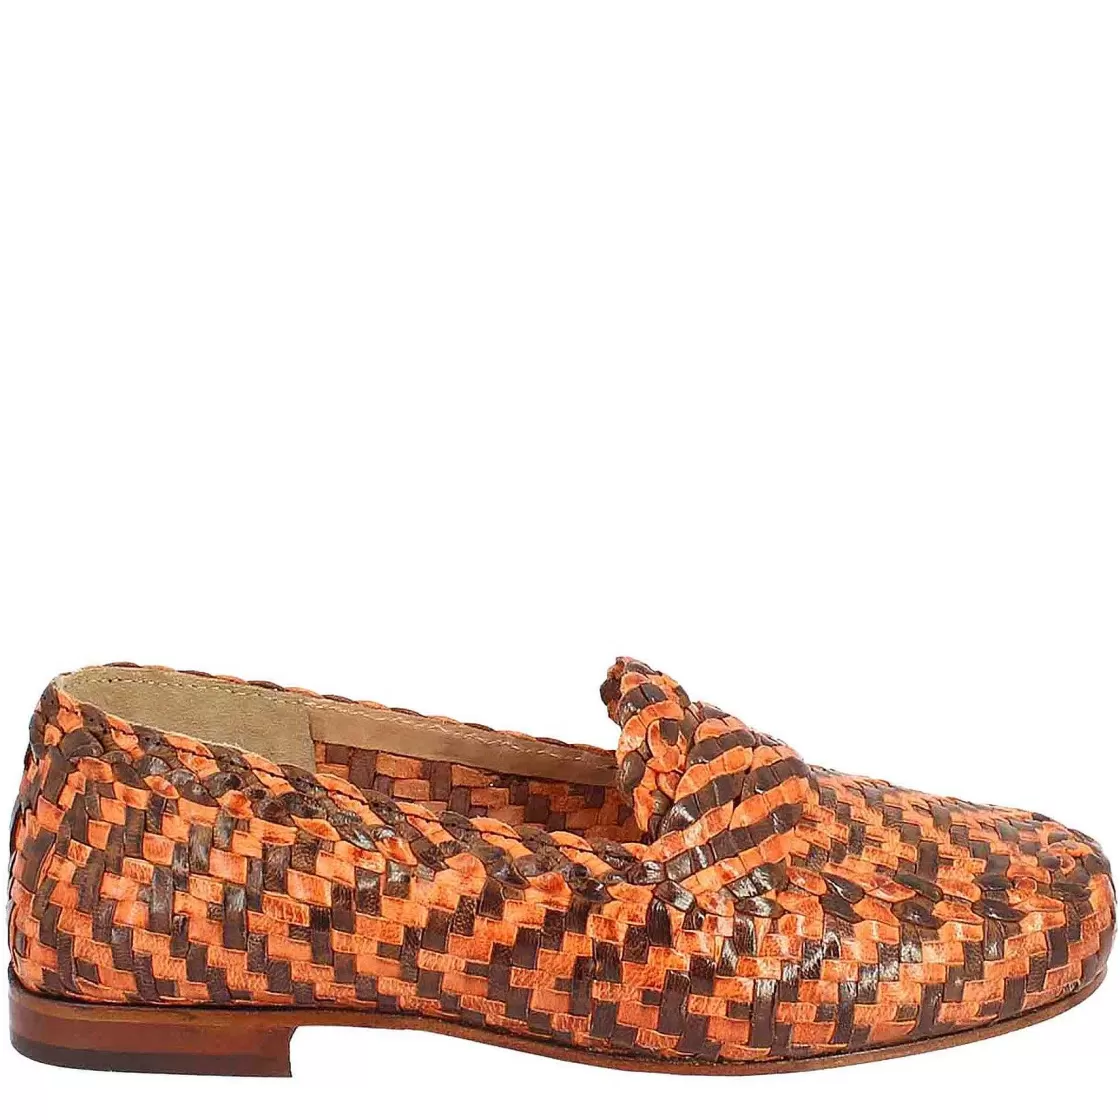 Leonardo Women'S Moccasins In Brown And Orange Woven Leather Cheap